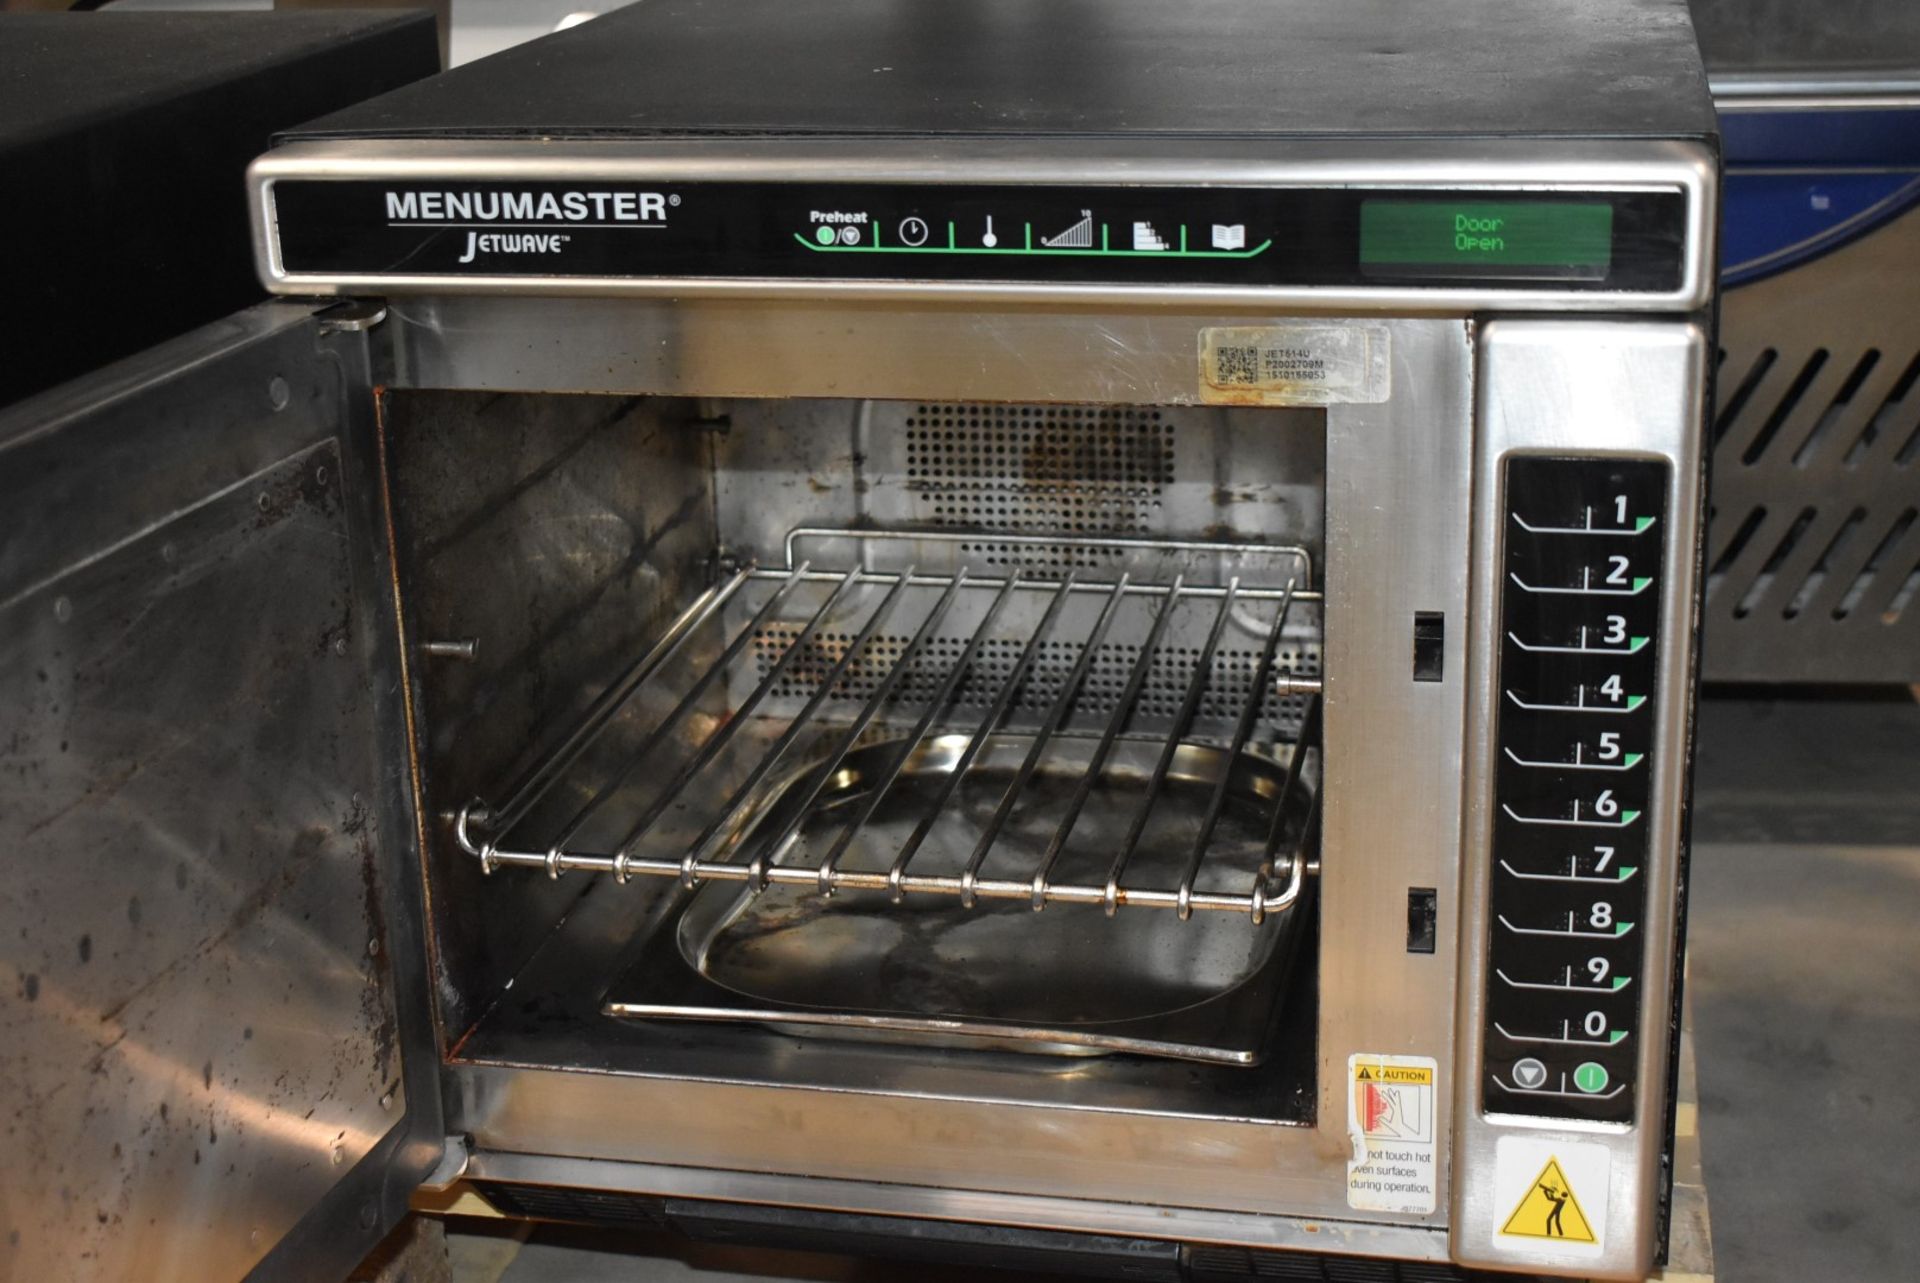 1 x Menumaster Jetwave JET514U High Speed Combination Microwave Oven - RRP £2,400 - Recently Removed - Image 10 of 11